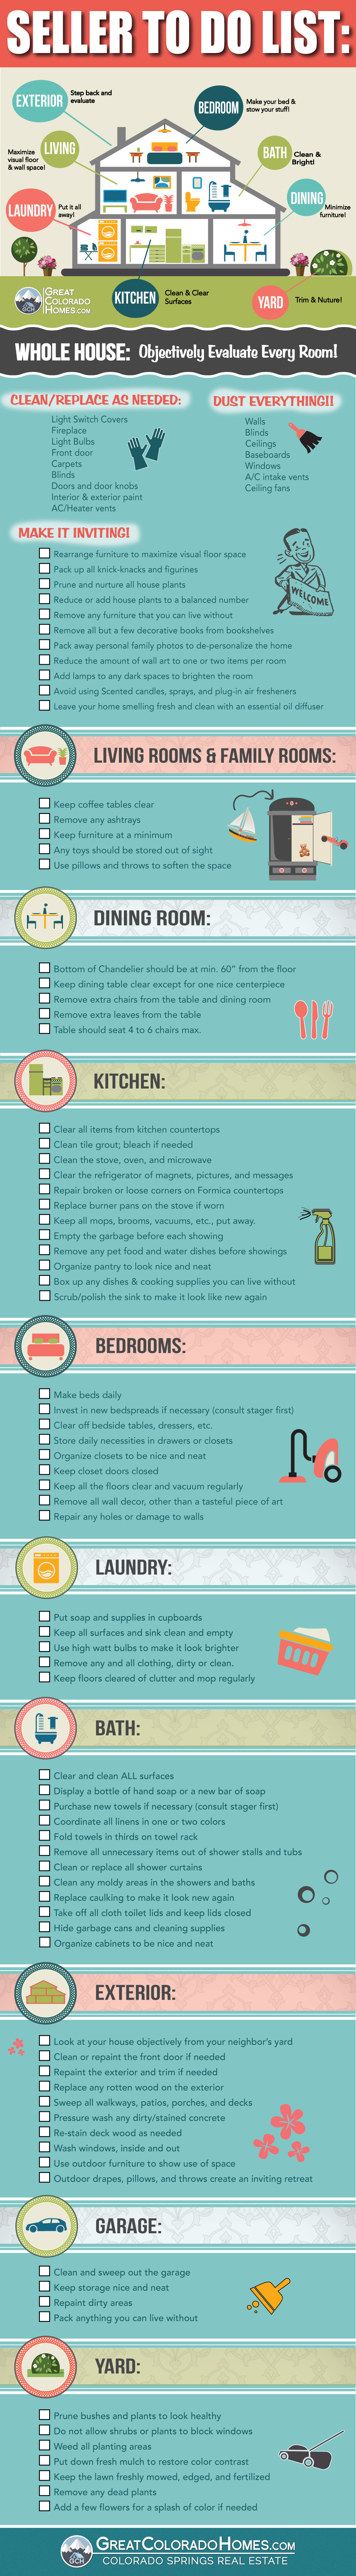 The Ultimate Home Sellers To Do Checklist Infographic